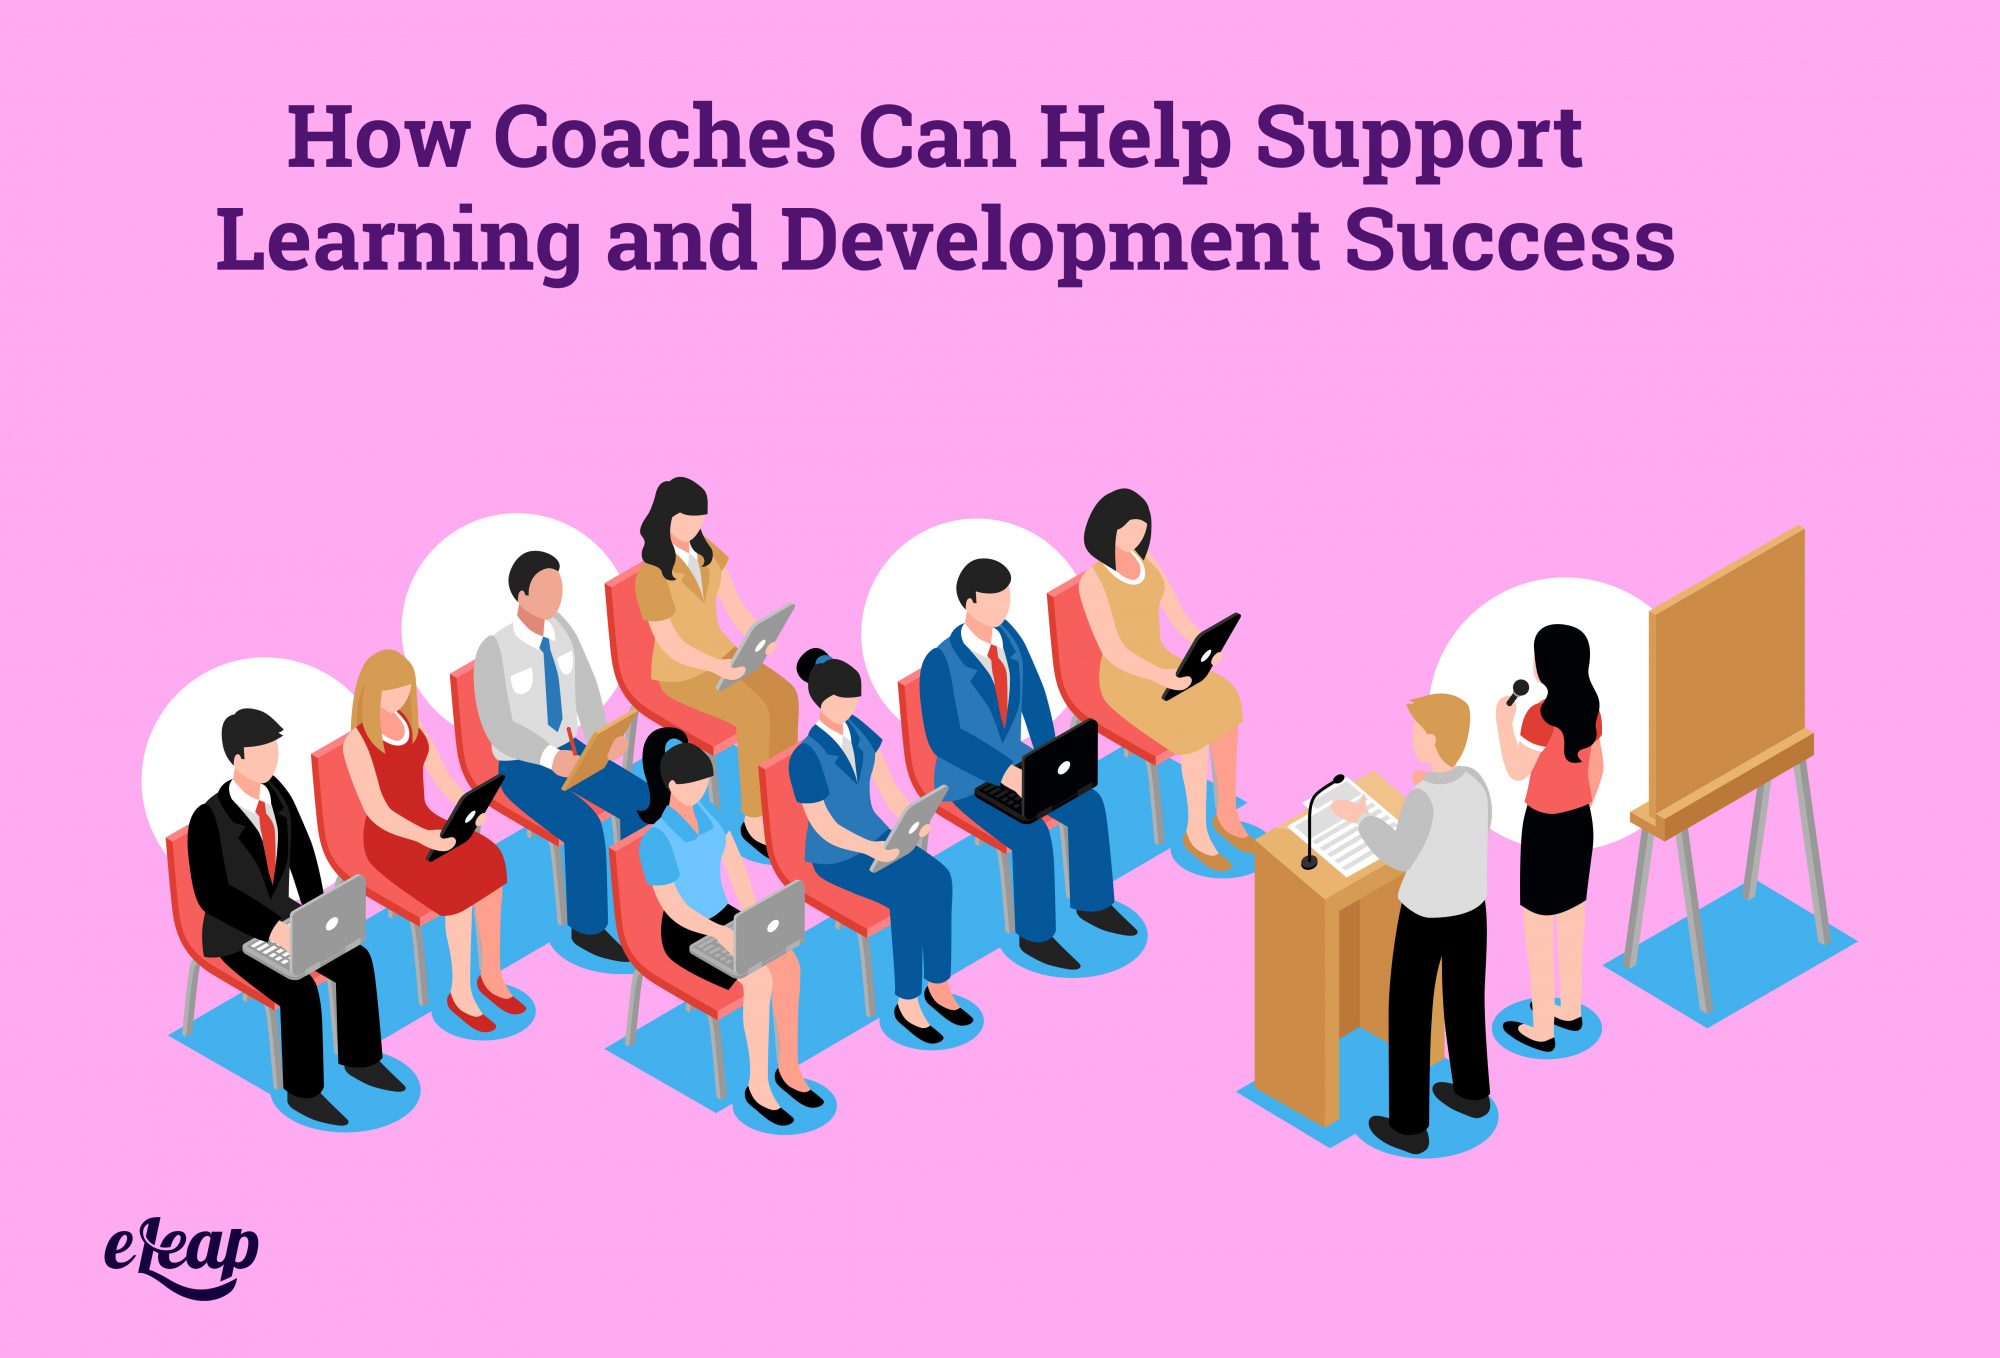 How Coaches Can Help Support Learning and Development Success